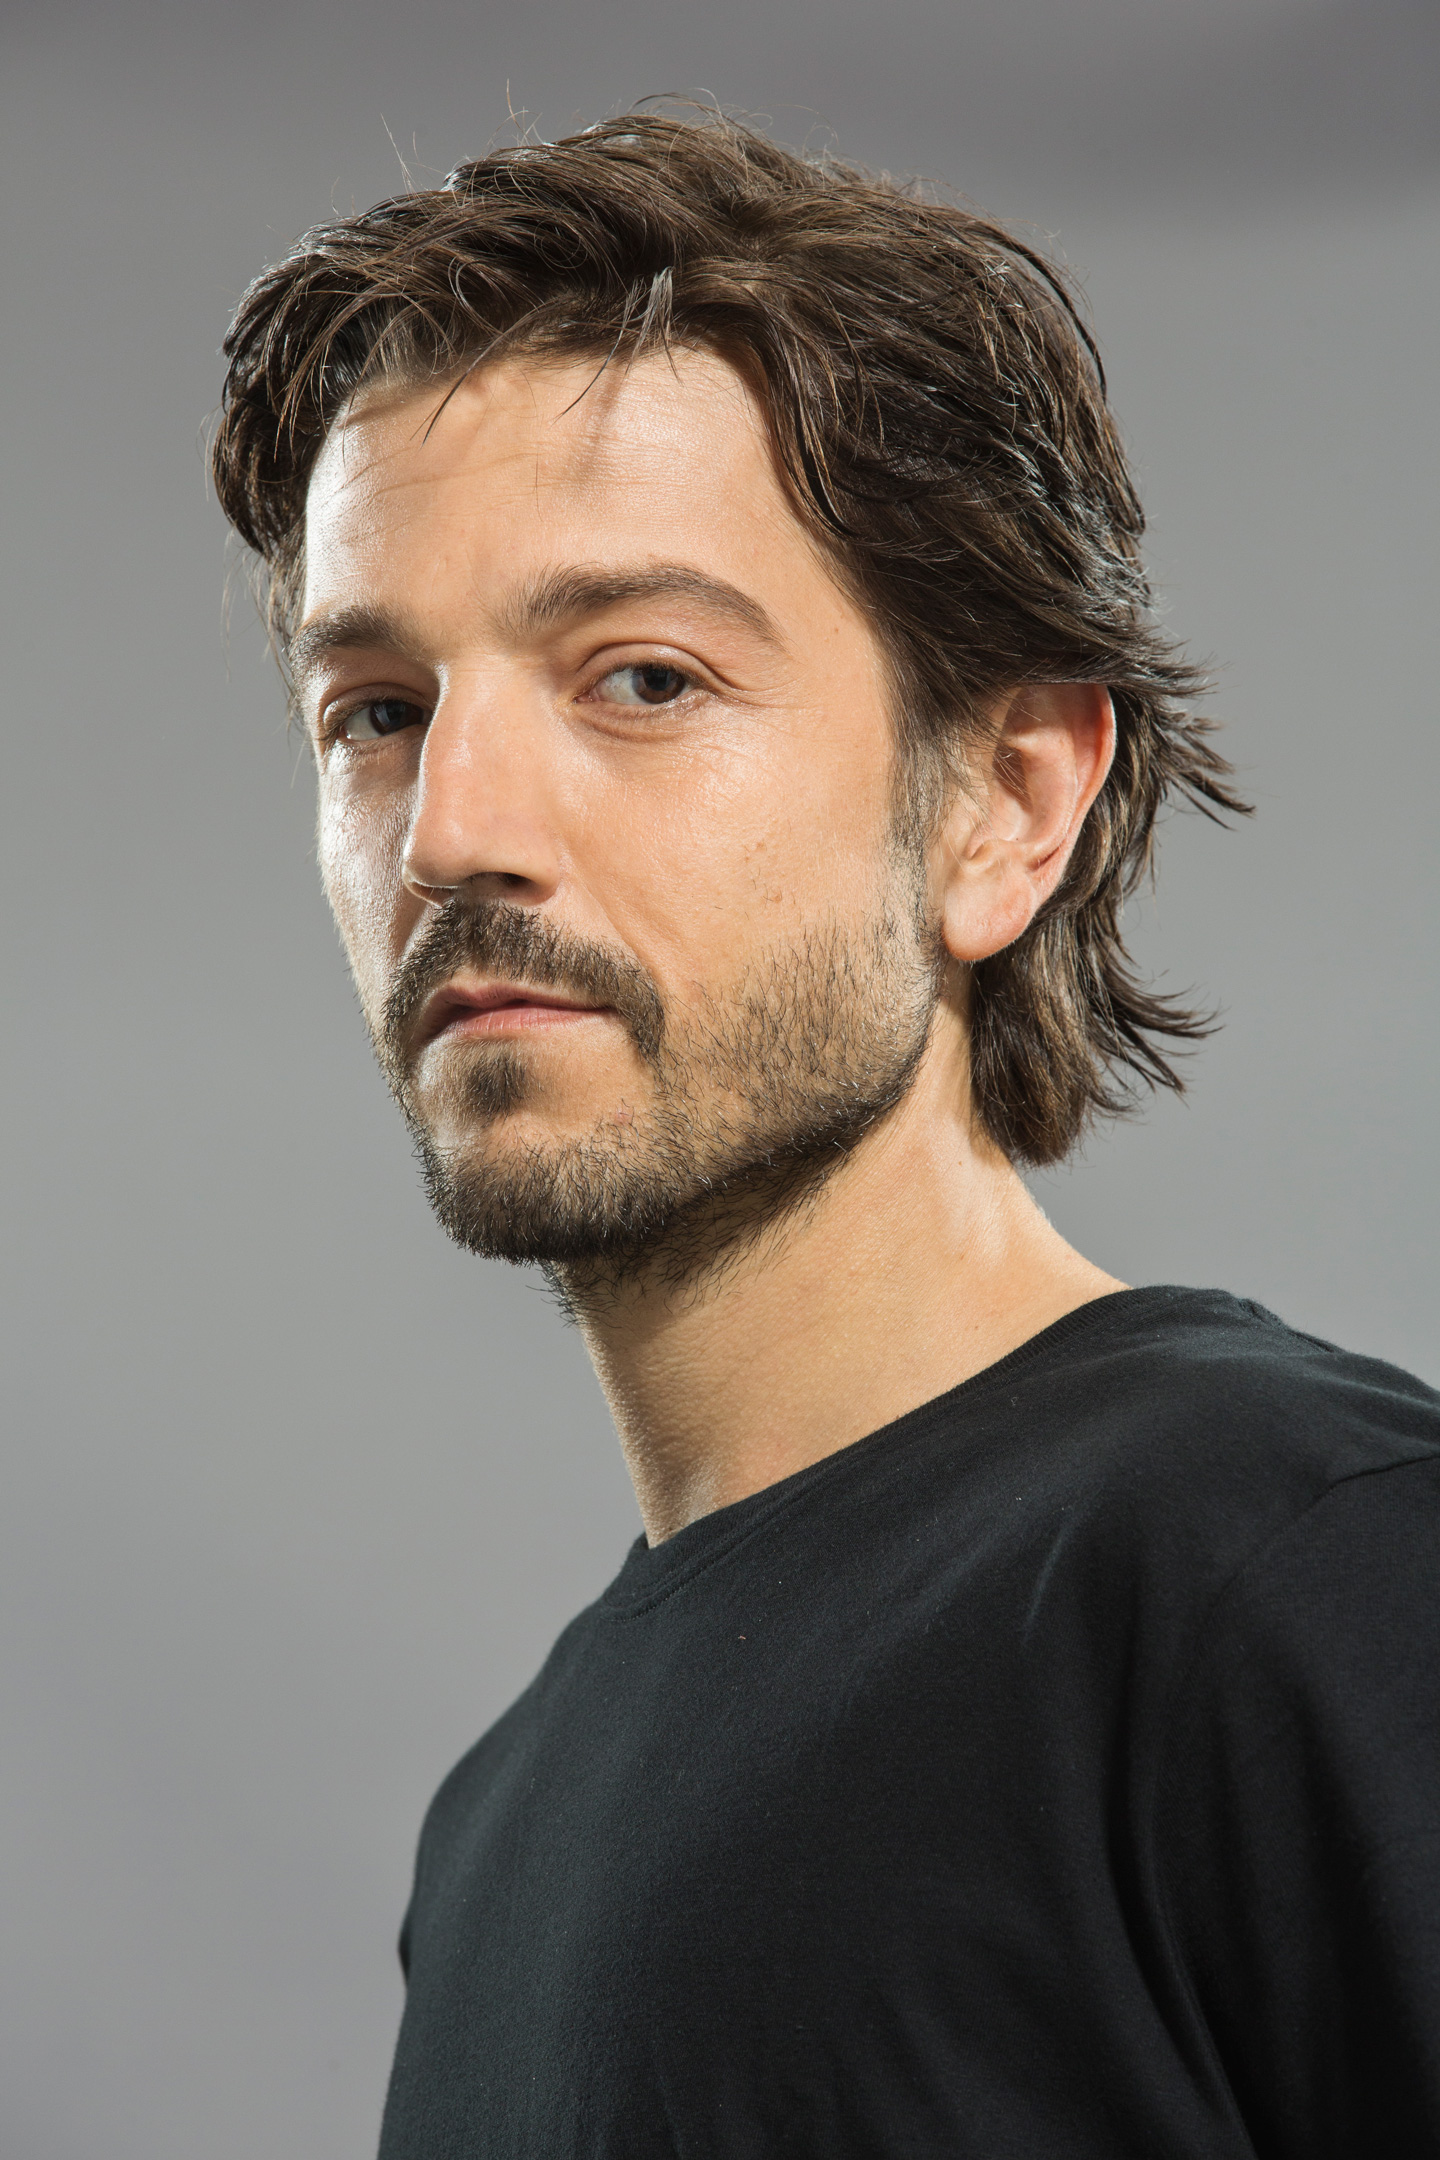 Diego Luna and the Cast and Crew of Andor